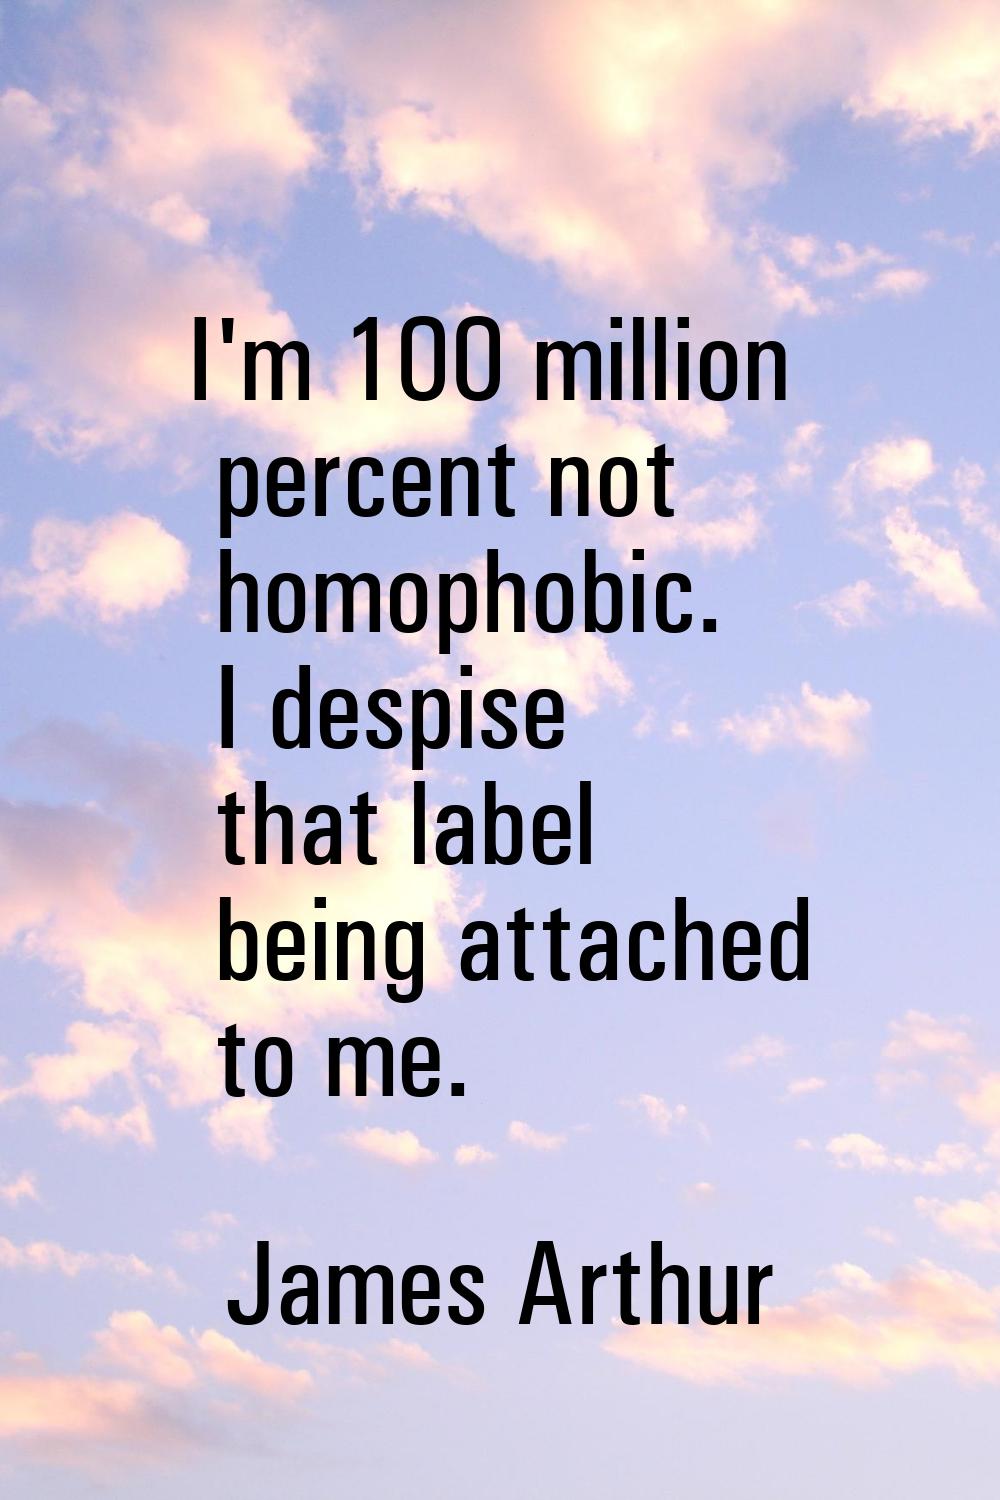 I'm 100 million percent not homophobic. I despise that label being attached to me.